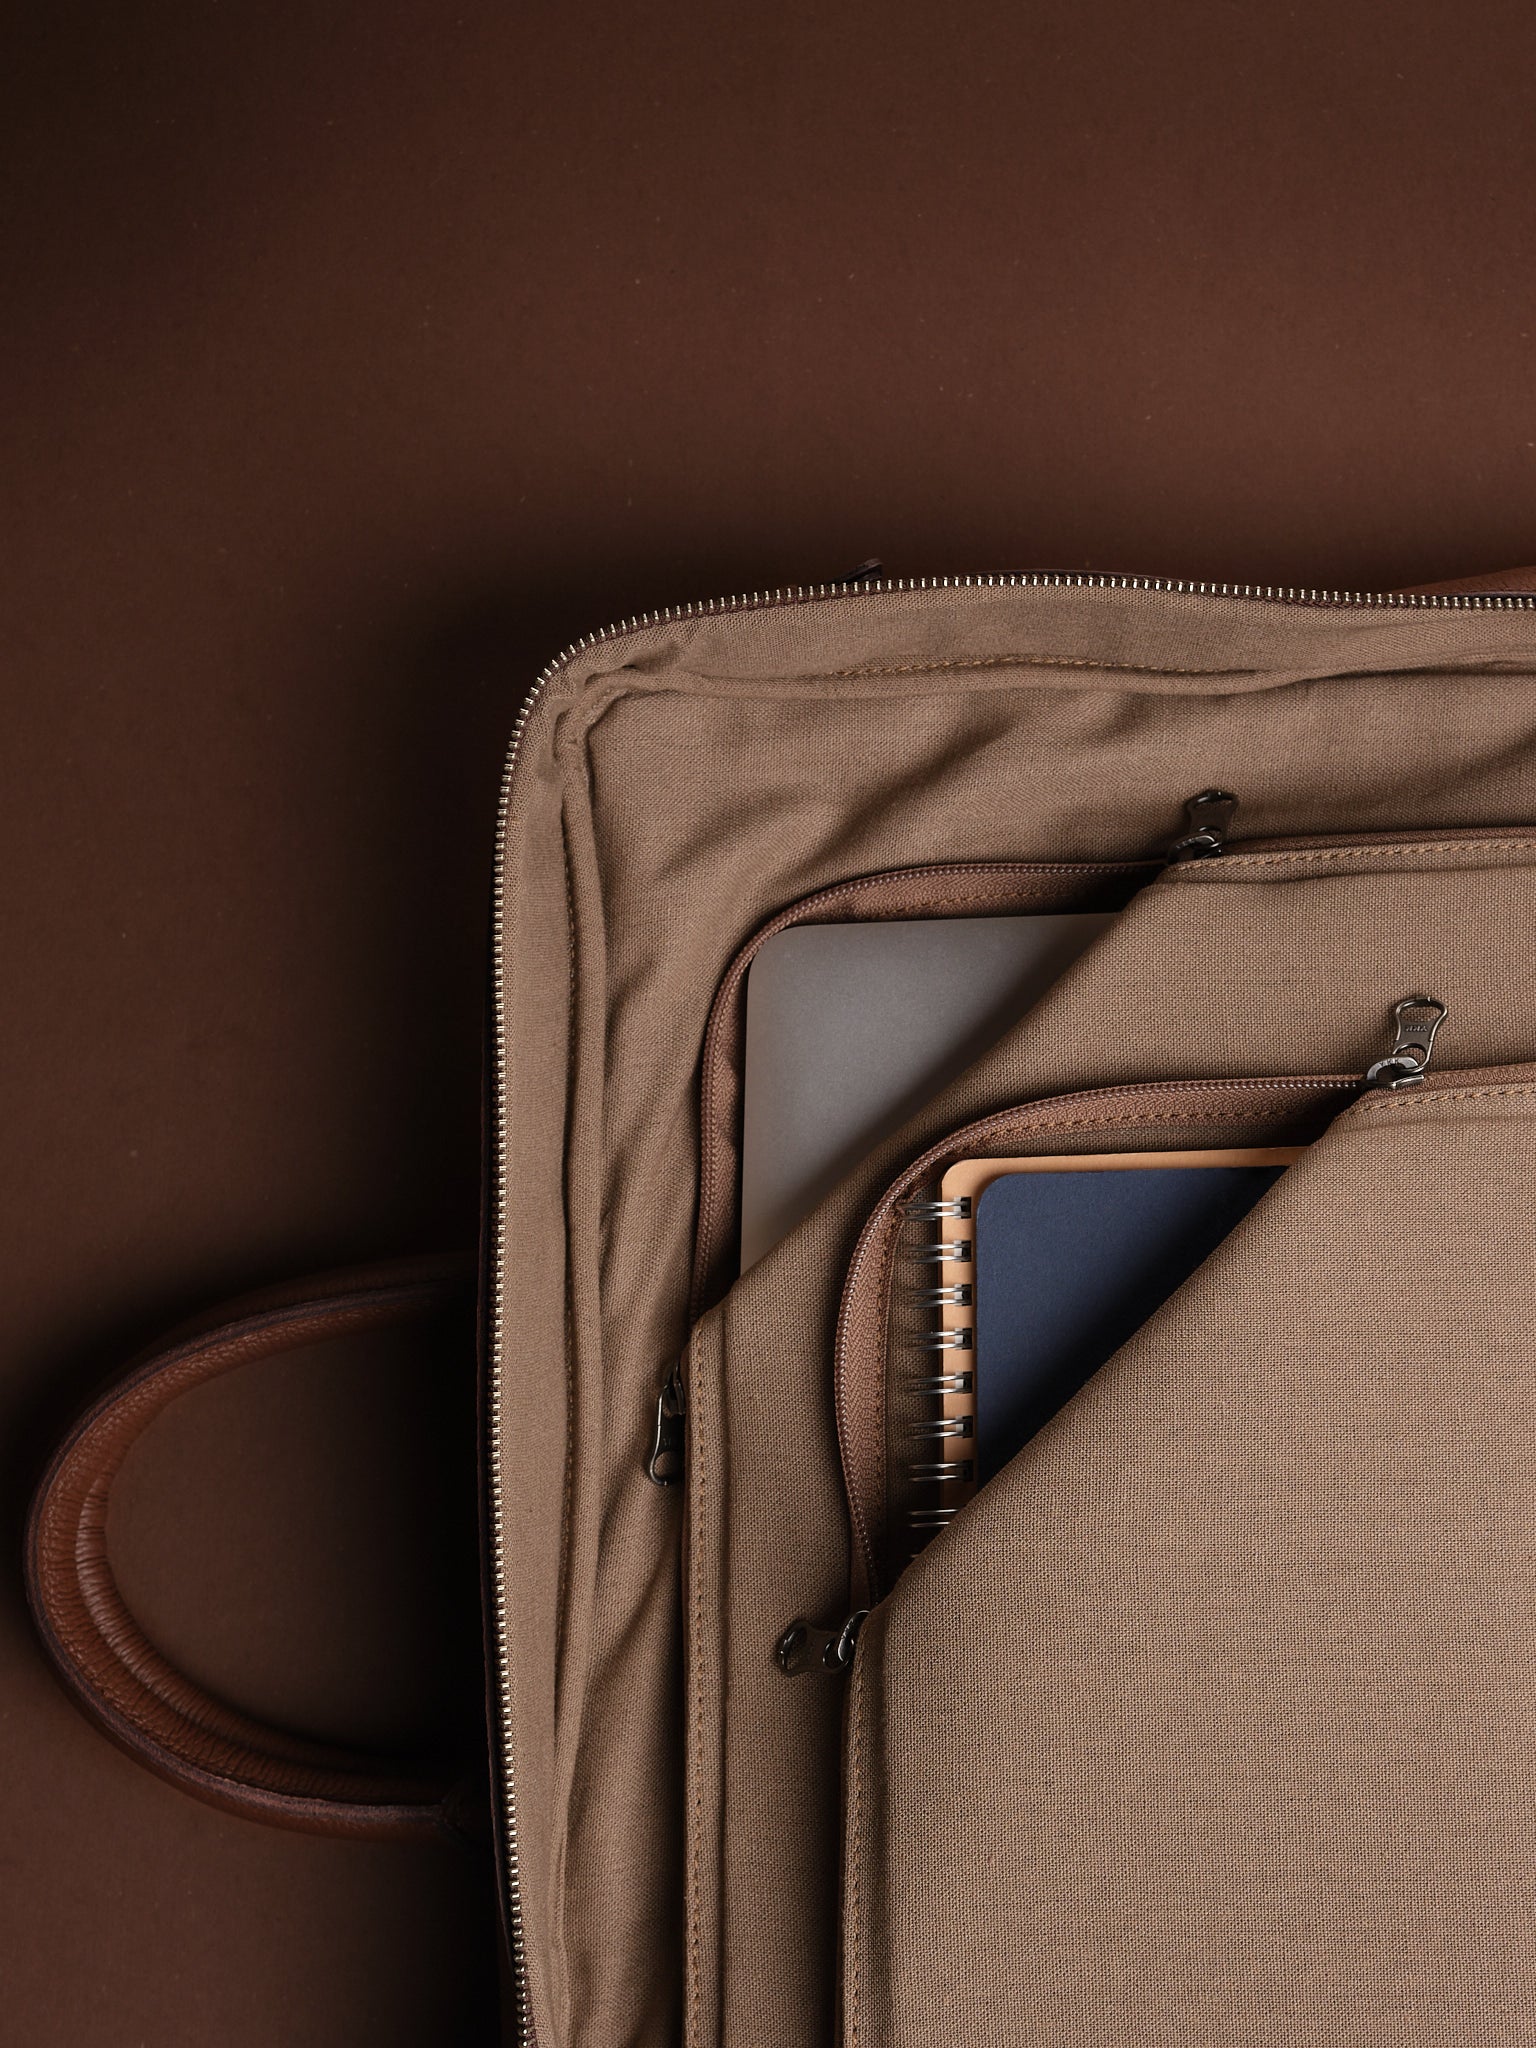 Tech Compartments. Professional Backpack Brown by Capra Leather